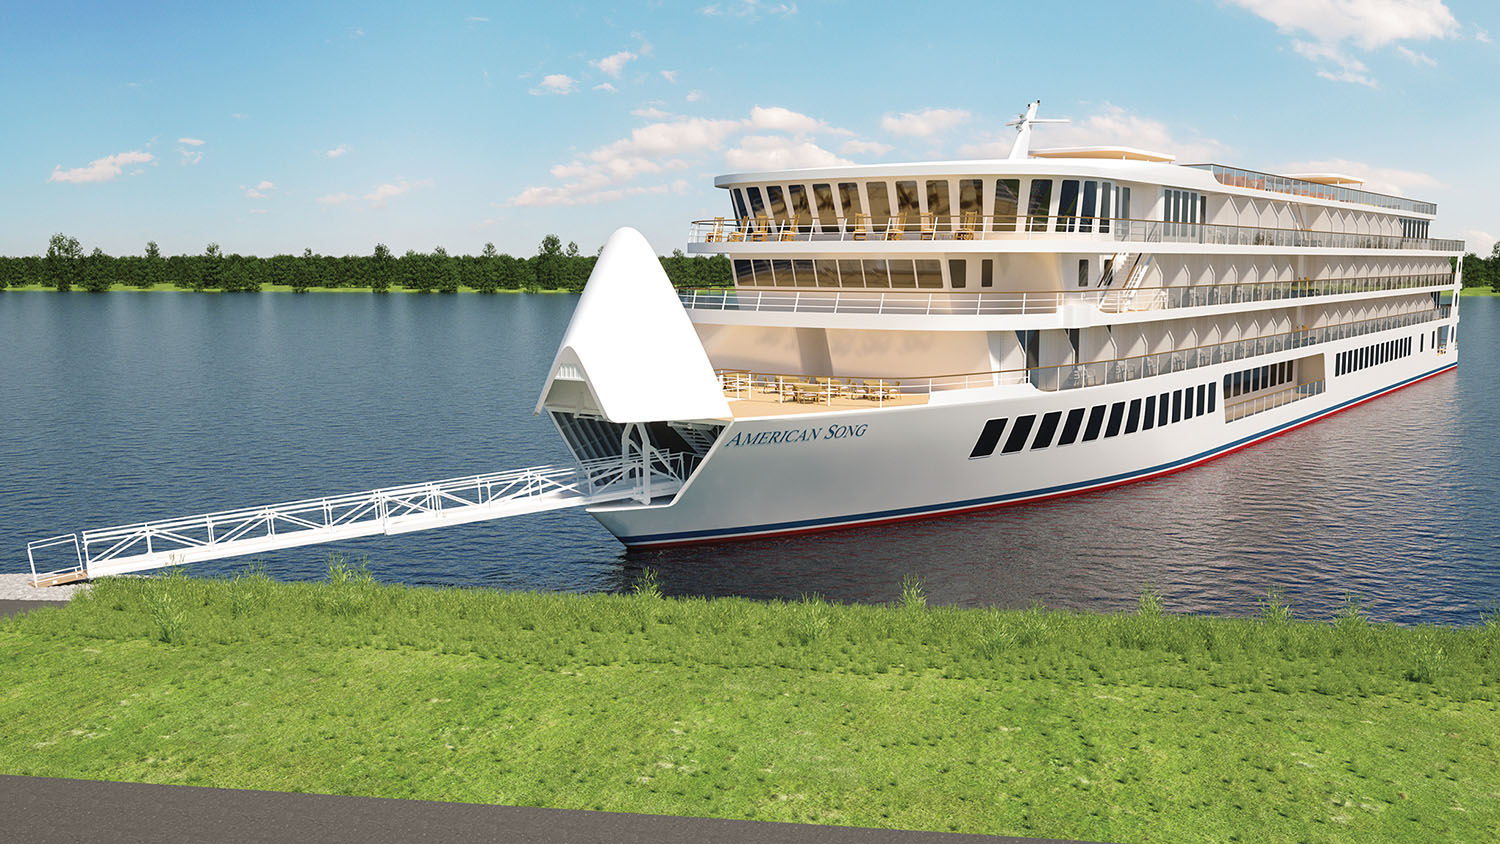 Vessel has flip-up bow with retractable gangway.